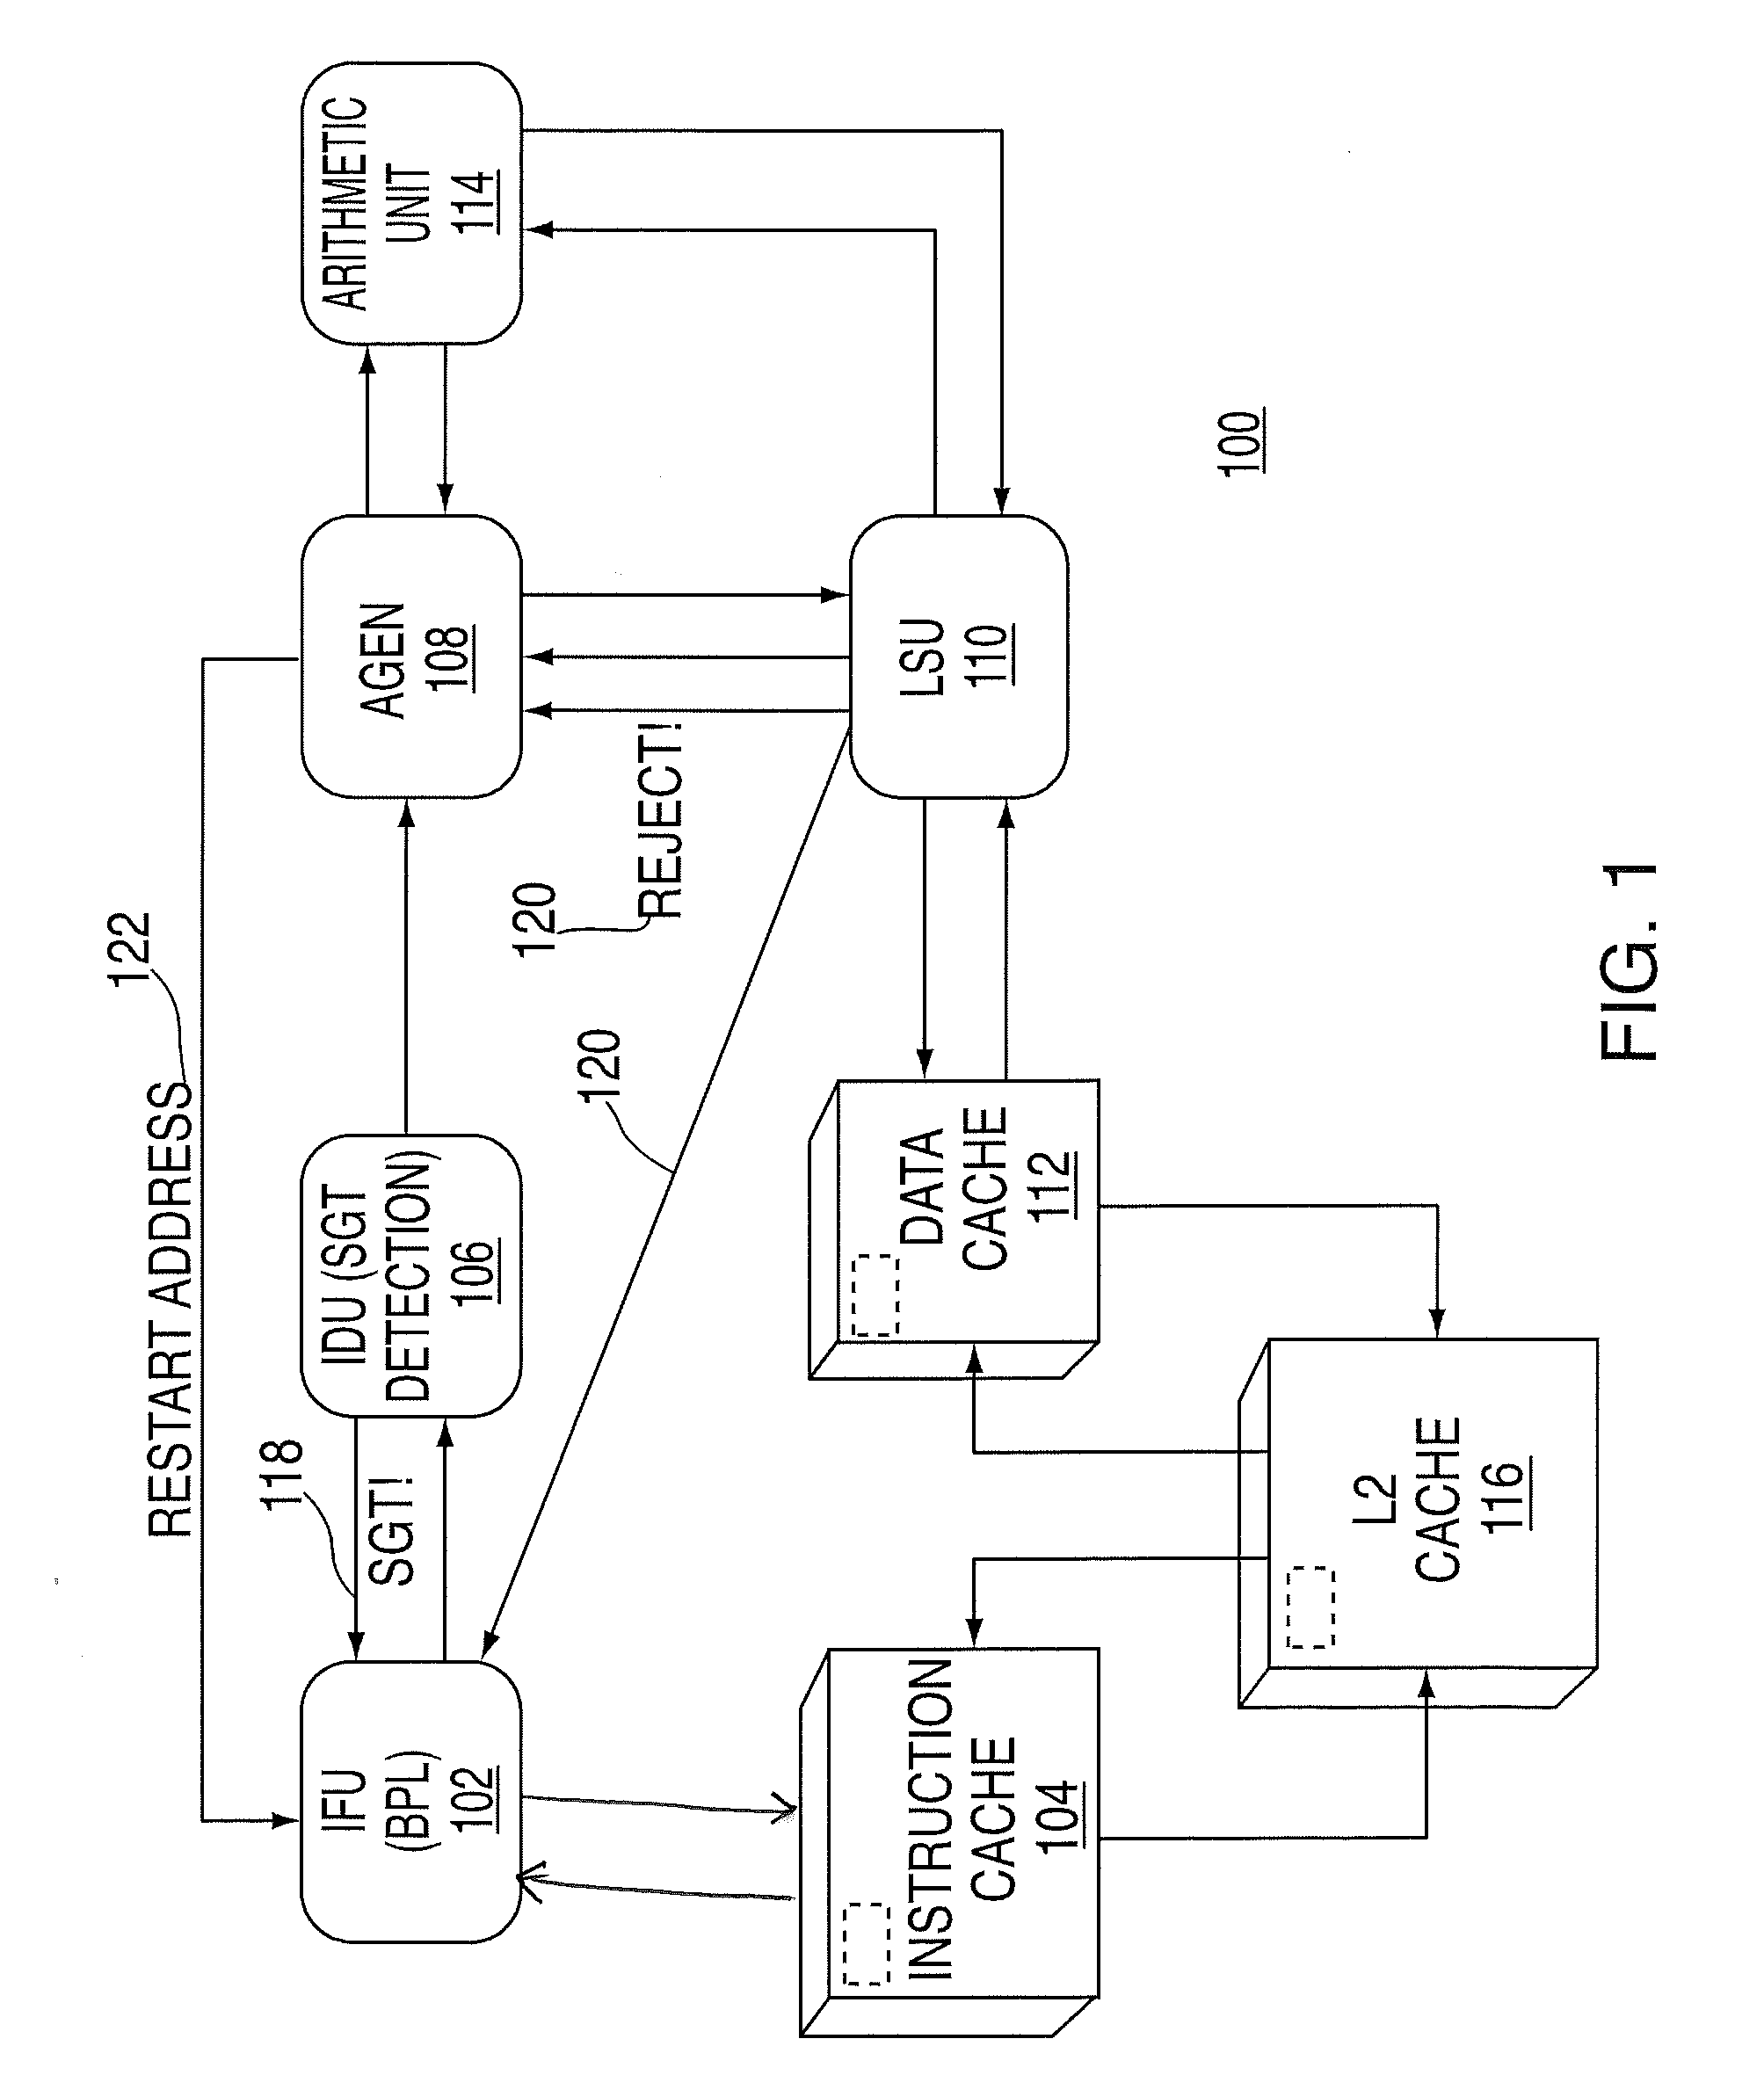 System and method for controlling restarting of instruction fetching using speculative address computations